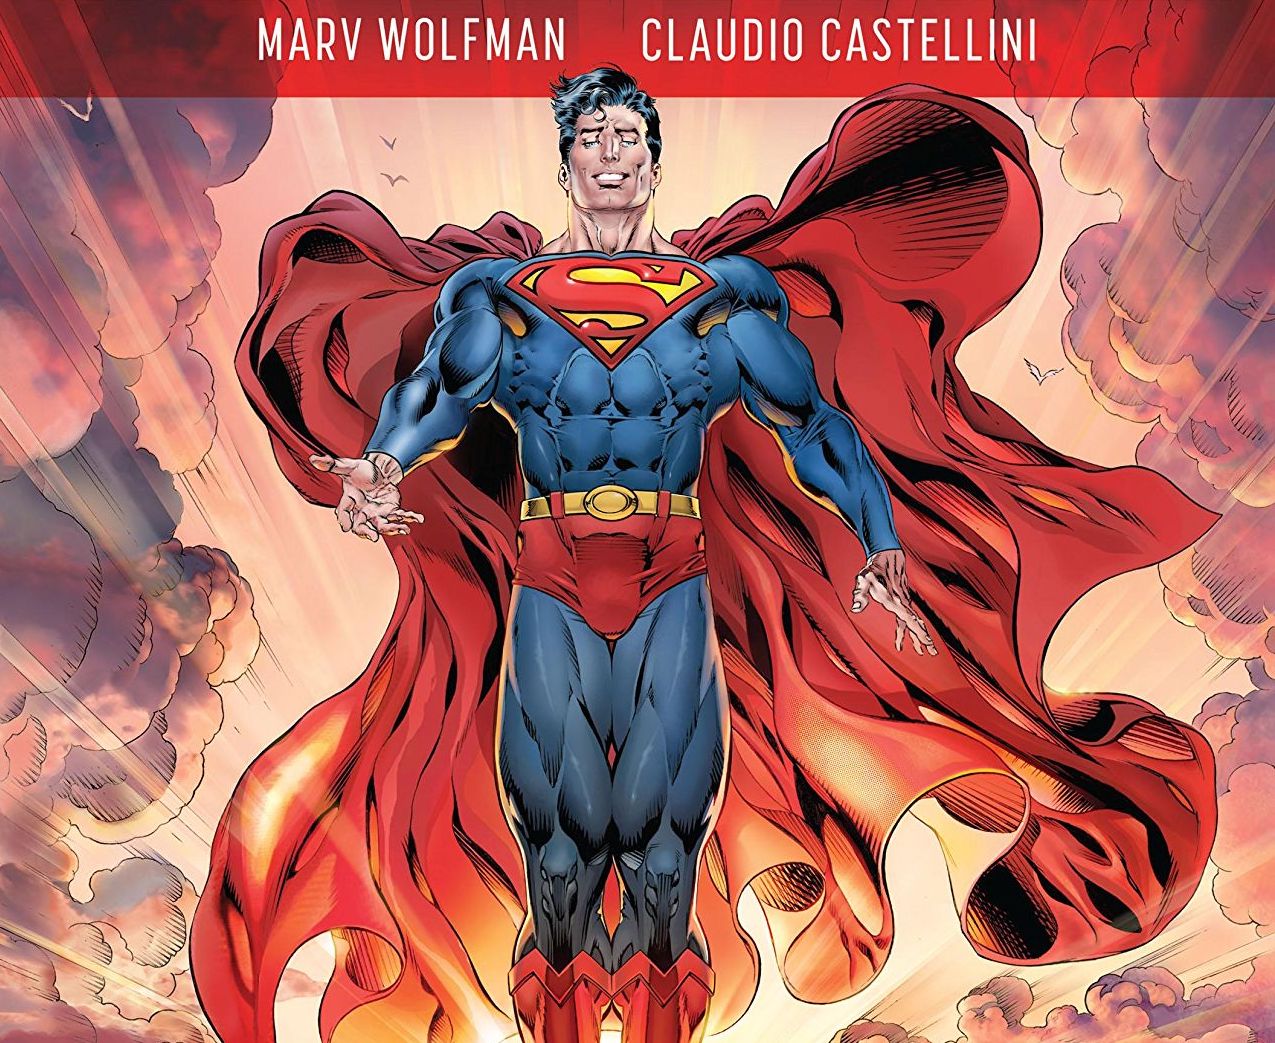 10 years to the page: Marv Wolfman and Claudio Castellini discuss 'Man and Superman: The Deluxe Edition'